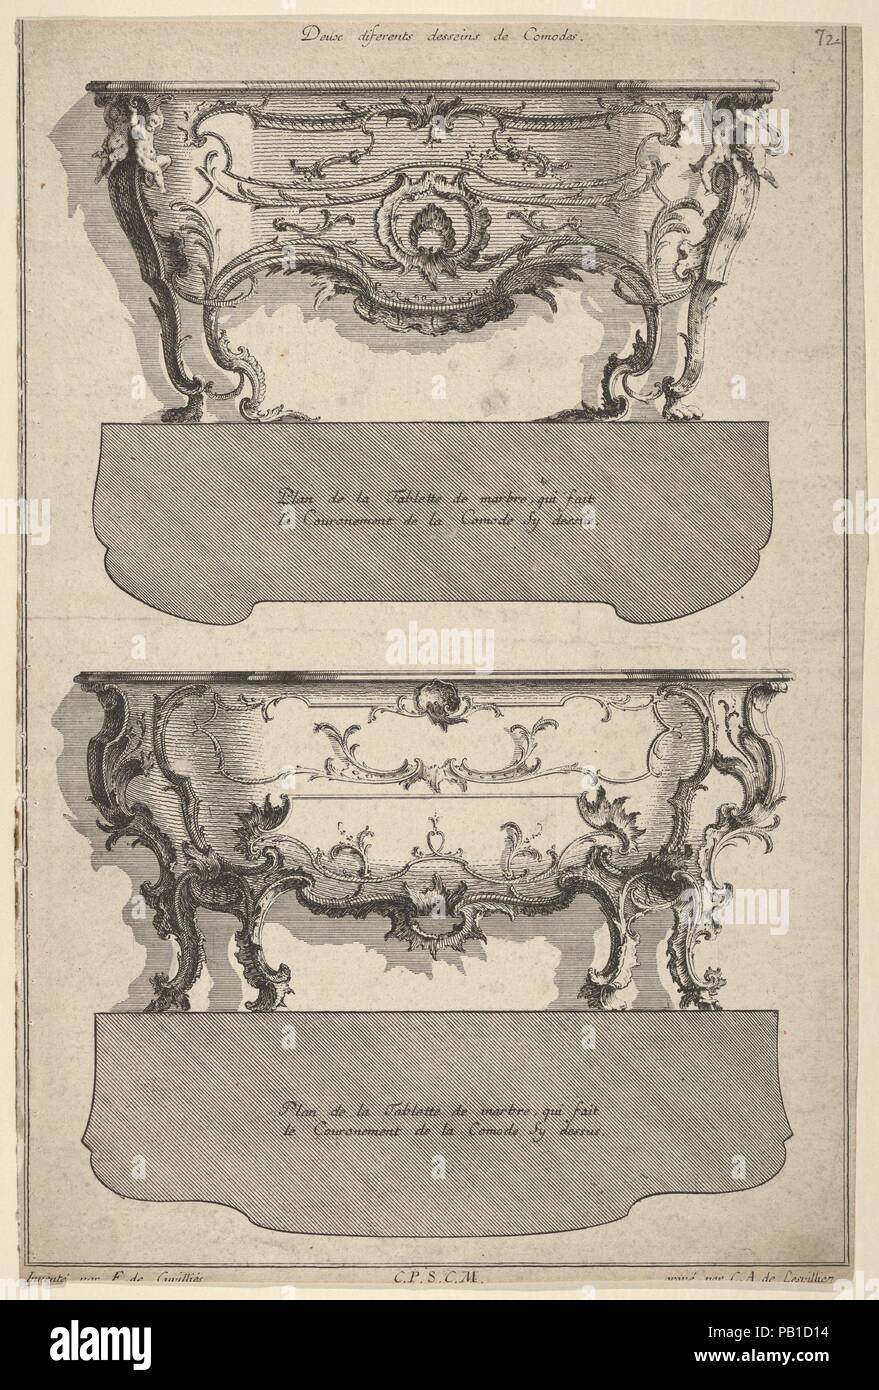 Designs for Two Commodes , from 'Livre de differents dessein de Comodes'. Artist: Jean François Cuvilliés the Elder (German (born Belgian), Soignies 1695-1768 Munich). Dimensions: Sheet: 13 5/16 × 9 in. (33.8 × 22.8 cm). Engraver: Carl Albert von Lespilliez (German, Nymphenburg 1723-1796 Munich). Date: 1745-56.  Two designs for commodes, placed one above the other. Each commode is combined with the outline of the entablature right below. According to the full title of this series, the commodes were to be executed in white with gilt mouldings. Museum: Metropolitan Museum of Art, New York, USA. Stock Photo